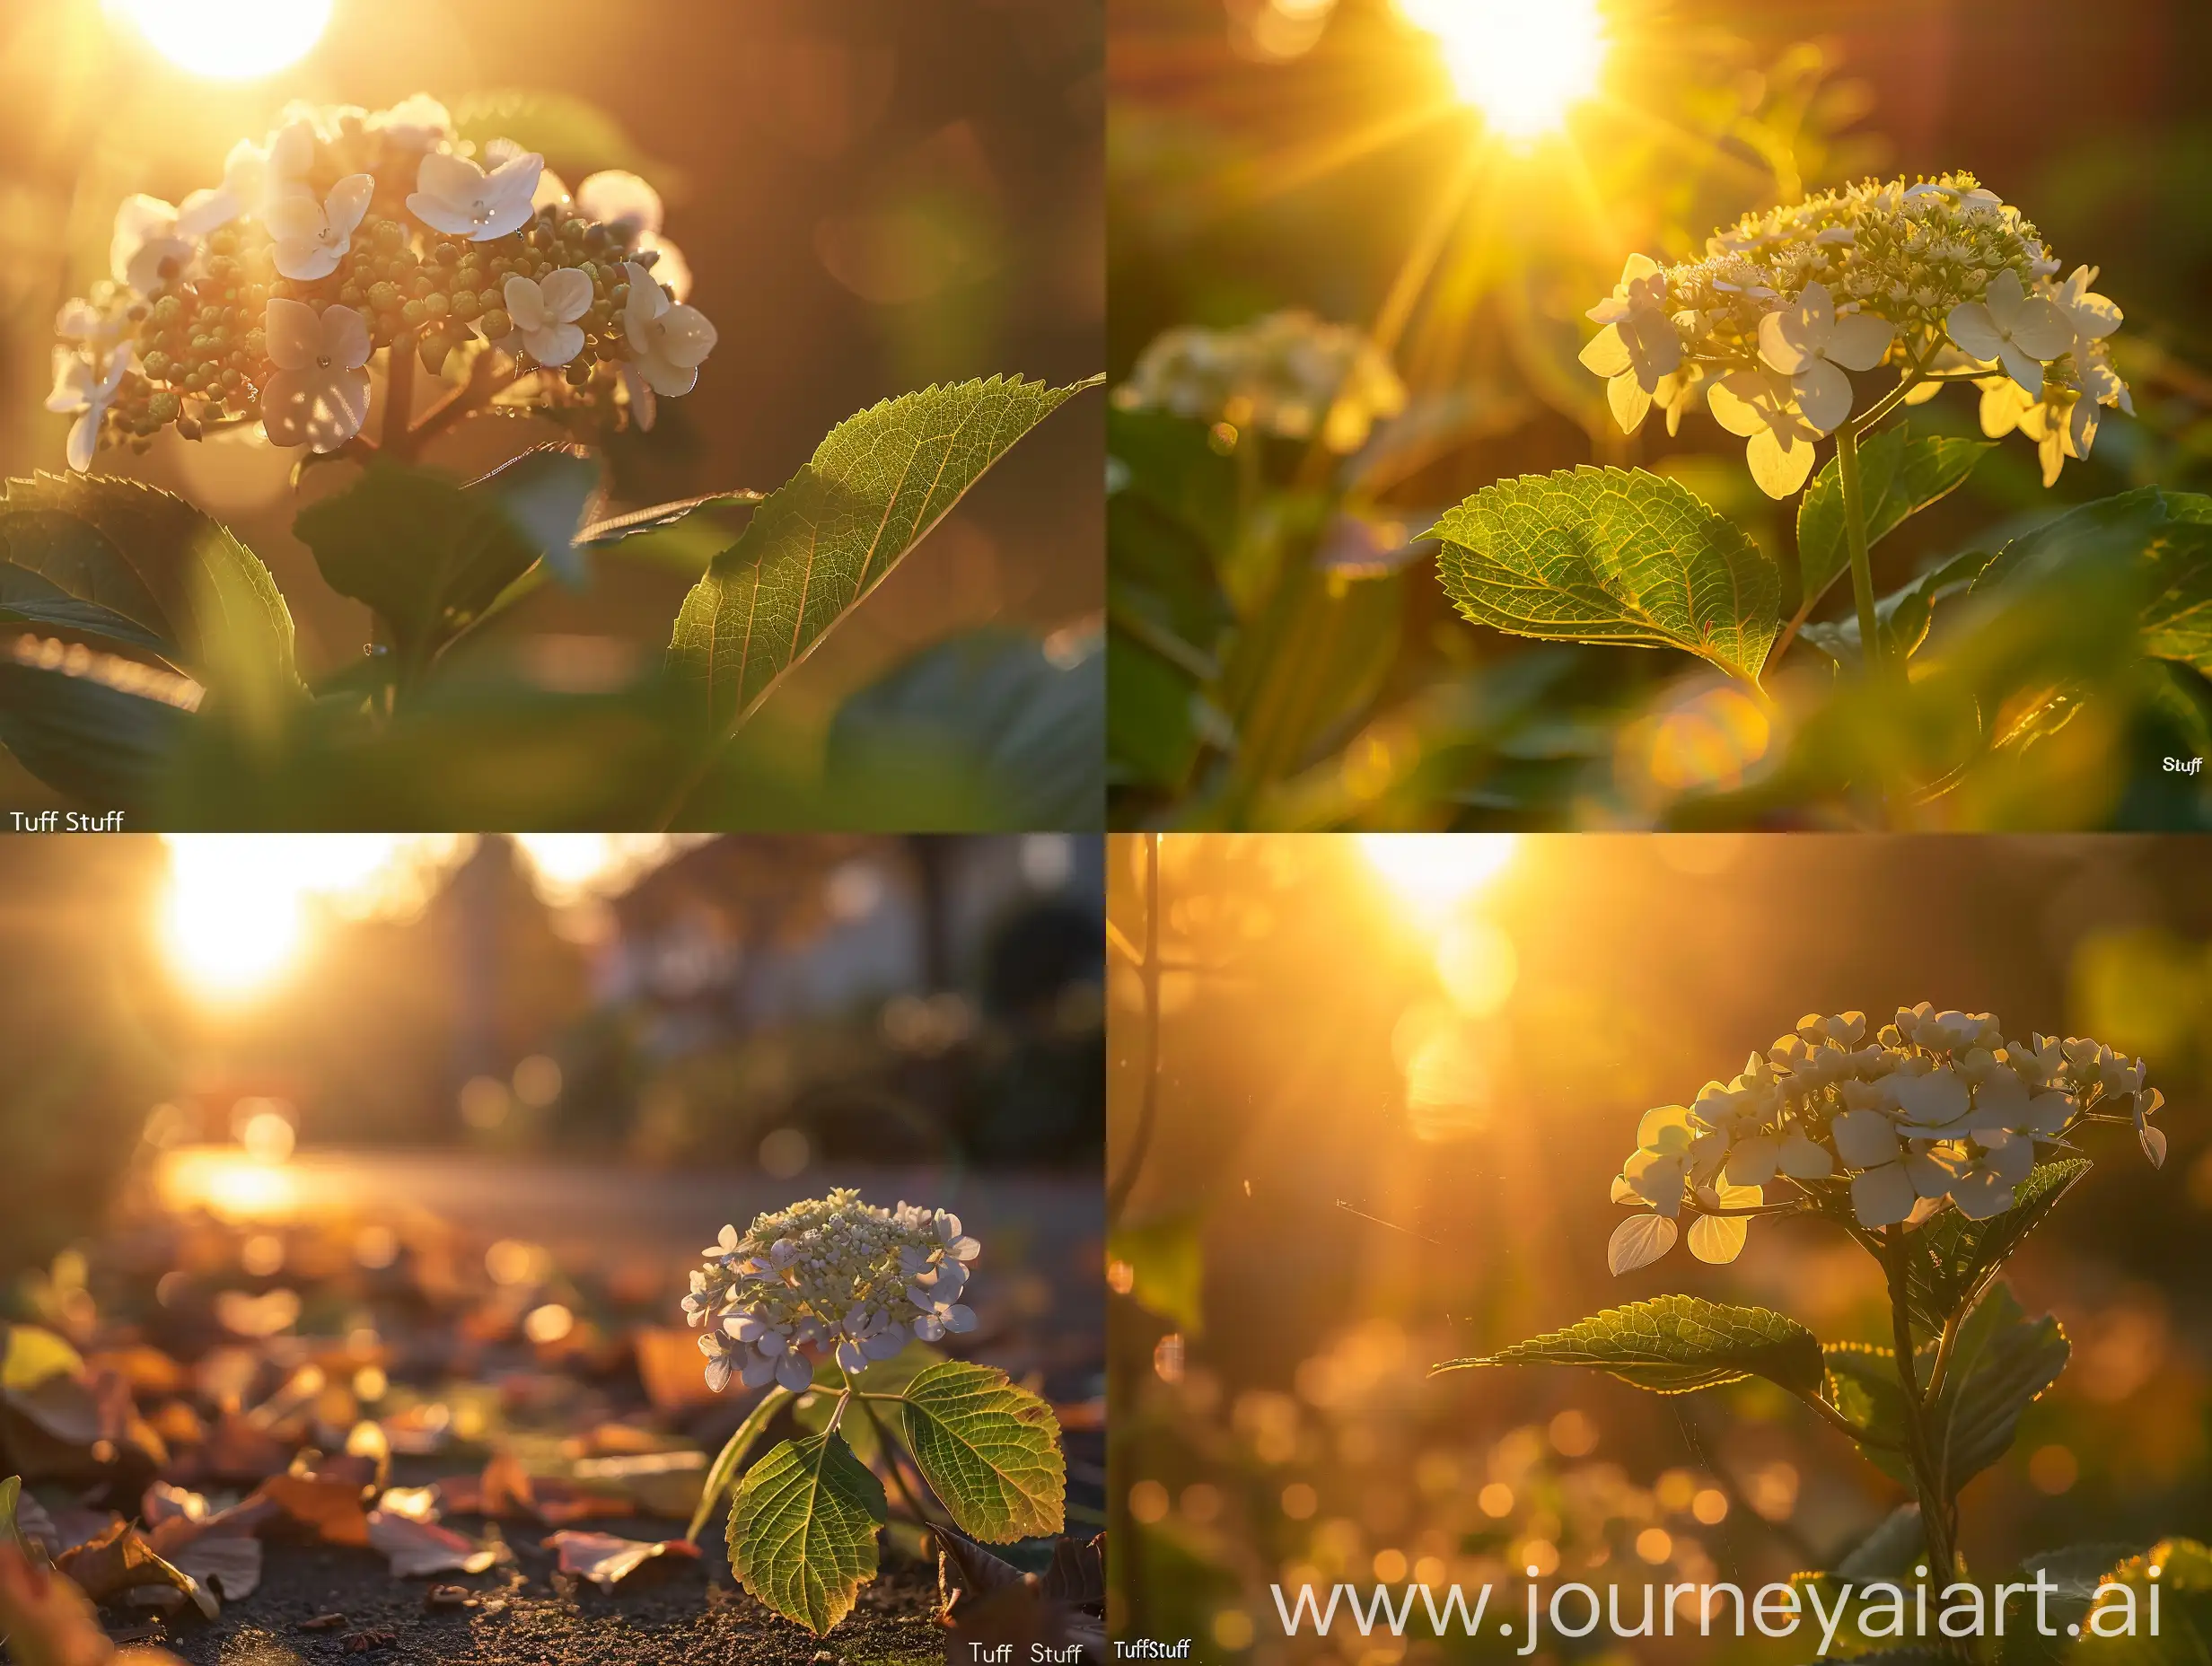 High detailed photo capturing a Hydrangea serrata, Tiny Tuff Stuff™. The sun, casting a warm, golden glow, bathes the scene in a serene ambiance, illuminating the intricate details of each element. The composition centers on a Hydrangea serrata, Tiny Tuff Stuff™. These plants are diminutive, no more than 18-24” tall and wide, perfect for even the smallest city or townhouse garden, patio containers, the mixed border or massed. The “Tuff Stuff” part of the name refers to the very hardy flower buds which promise a re. The image evokes a sense of tranquility and natural beauty, inviting viewers to immerse themselves in the splendor of the landscape. --ar 16:9 